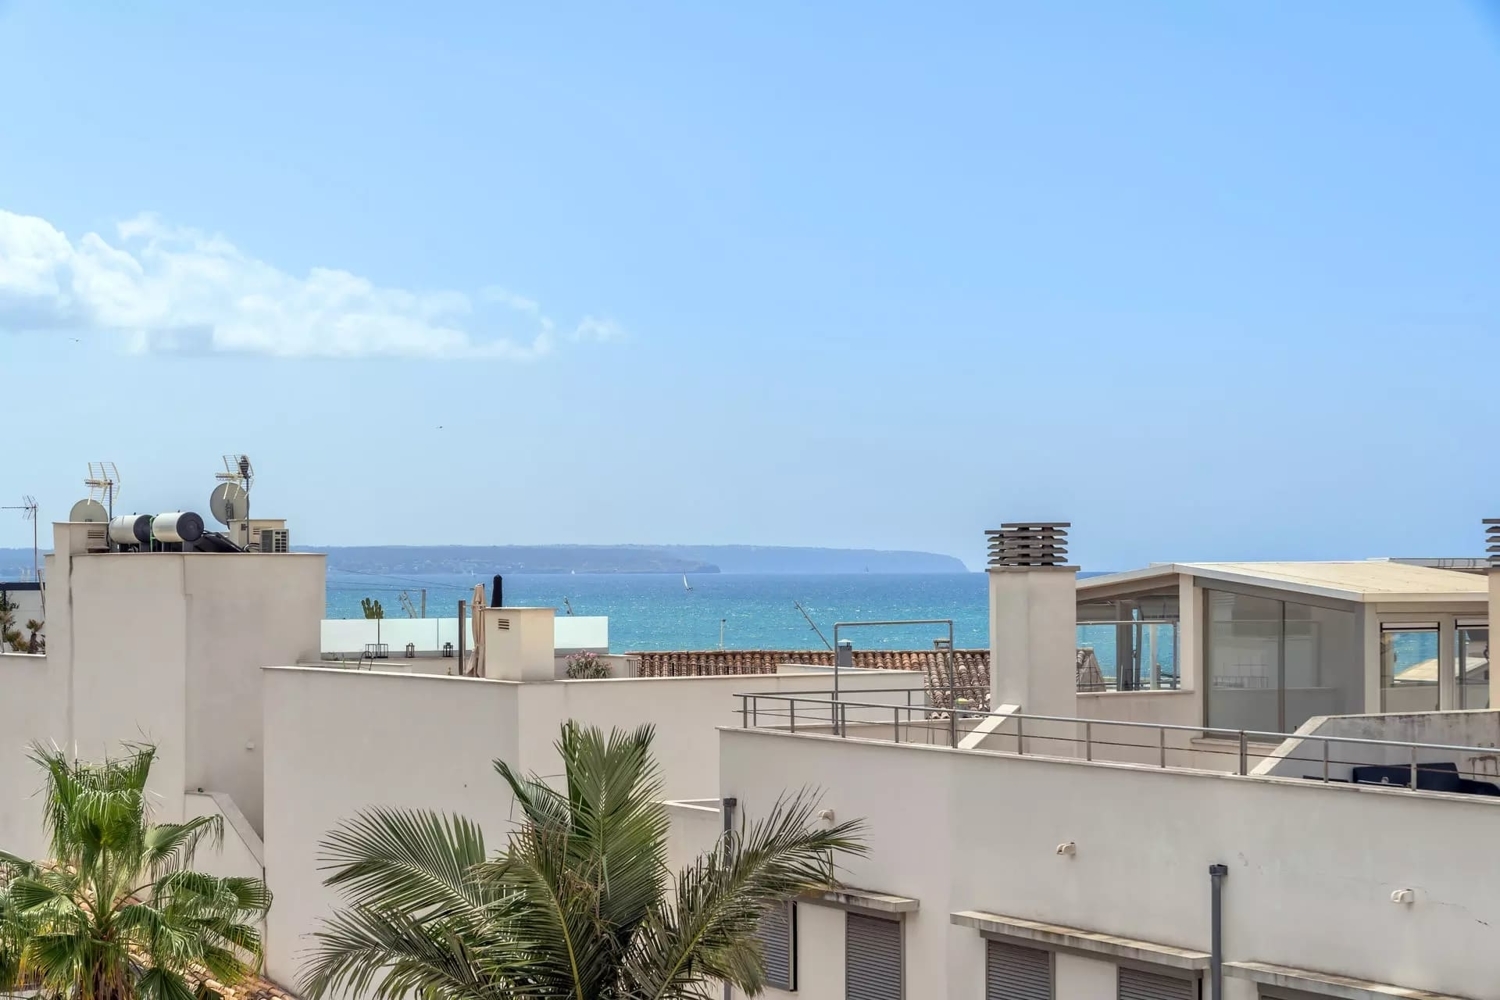 Stunning townhouse in Portixol with private roof terrace, pool and parking